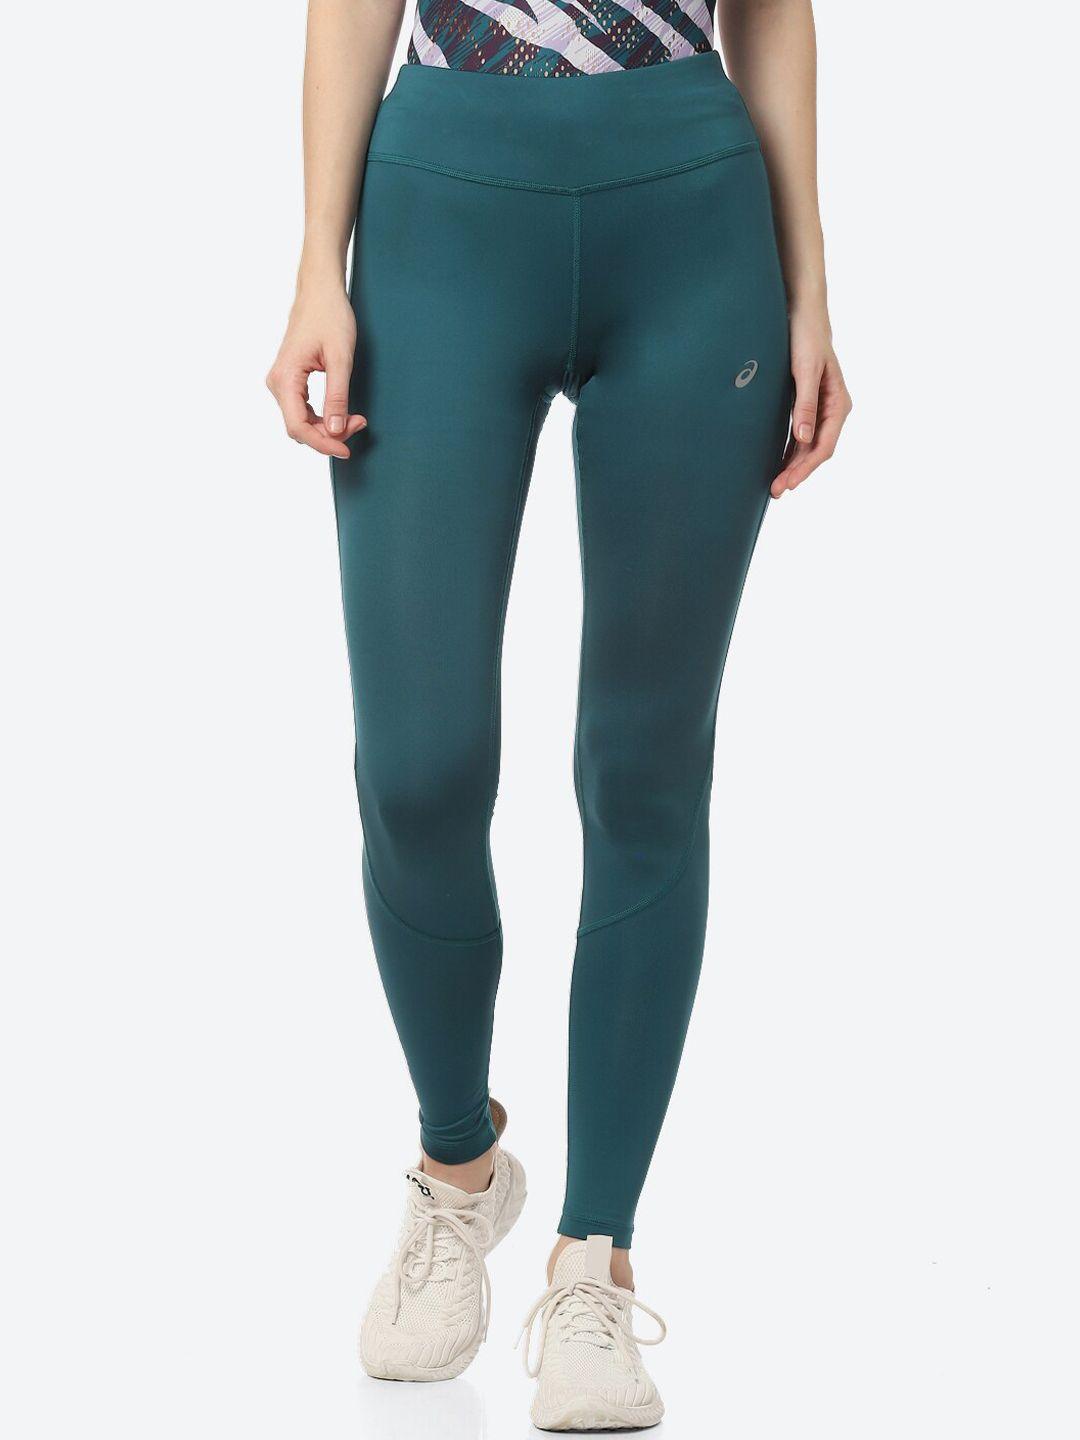 asics-women-green-solid-tights